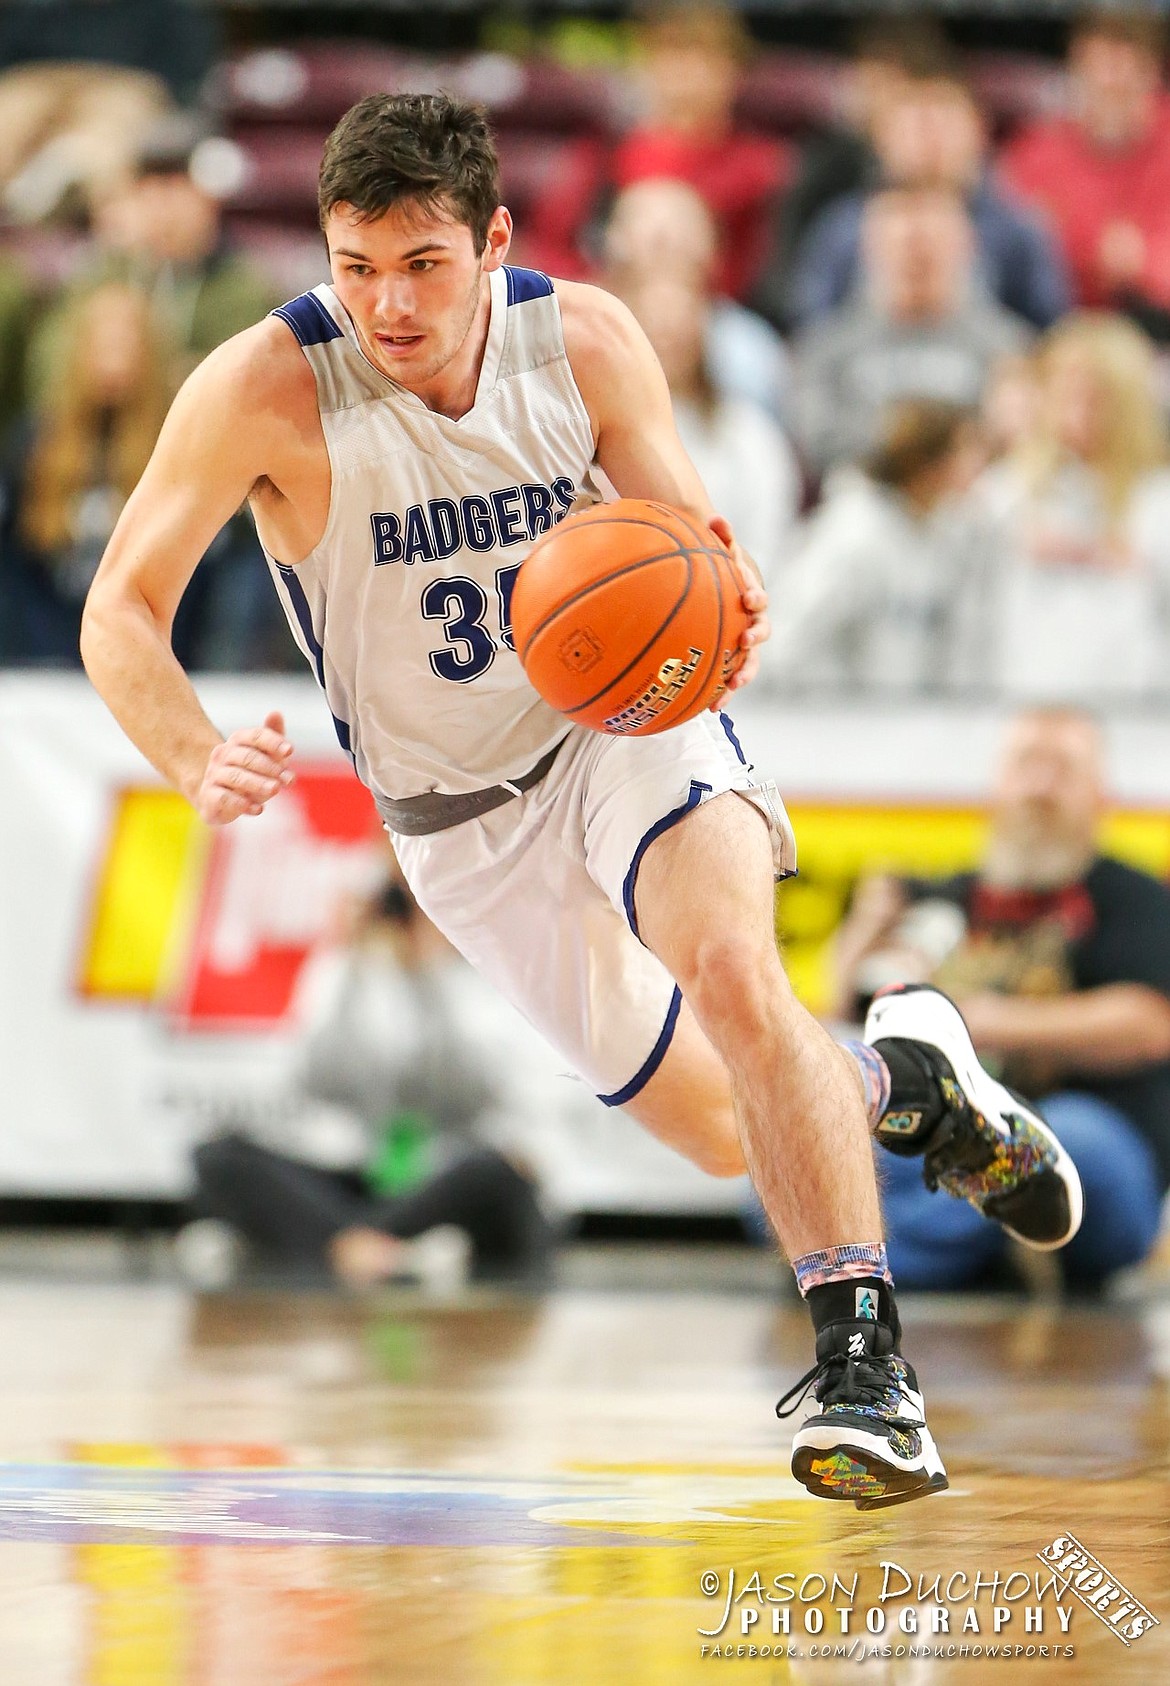 Braeden Blackmore at the 3A Idaho boys basketball state championship game.